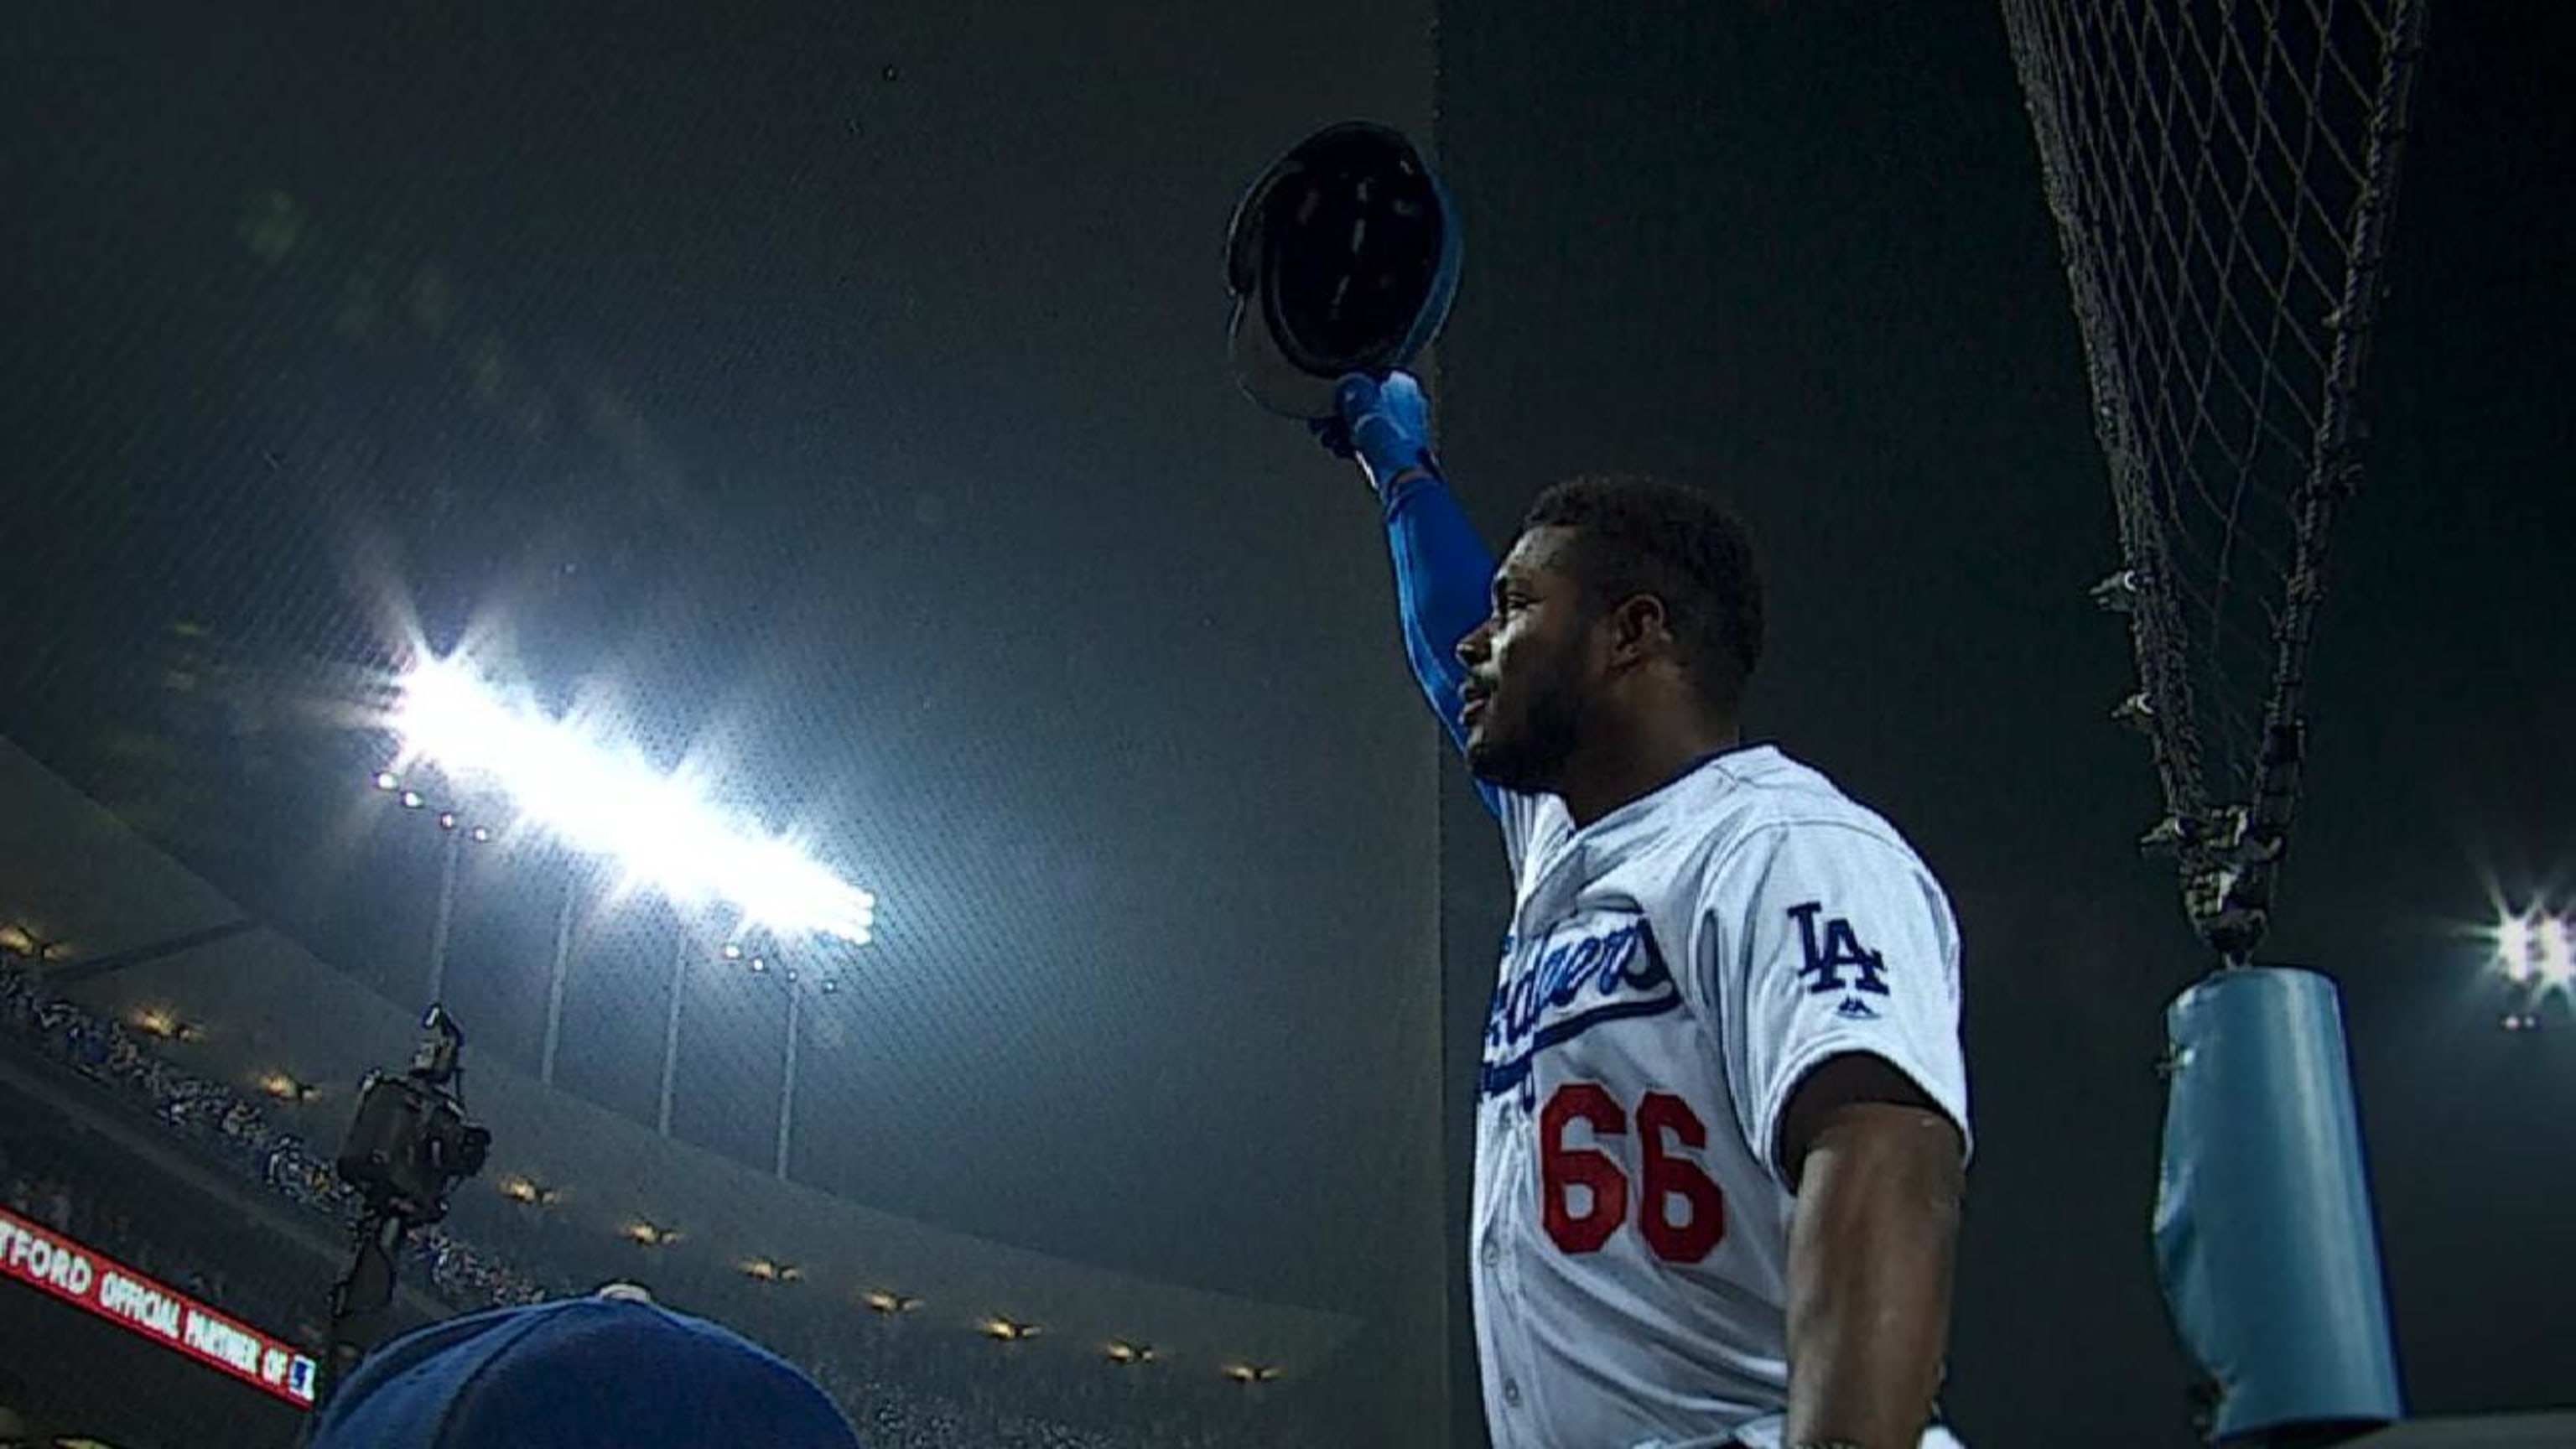 Yasiel Puig Commits $50,000 Donation for 50th Dodgers Dreamfield